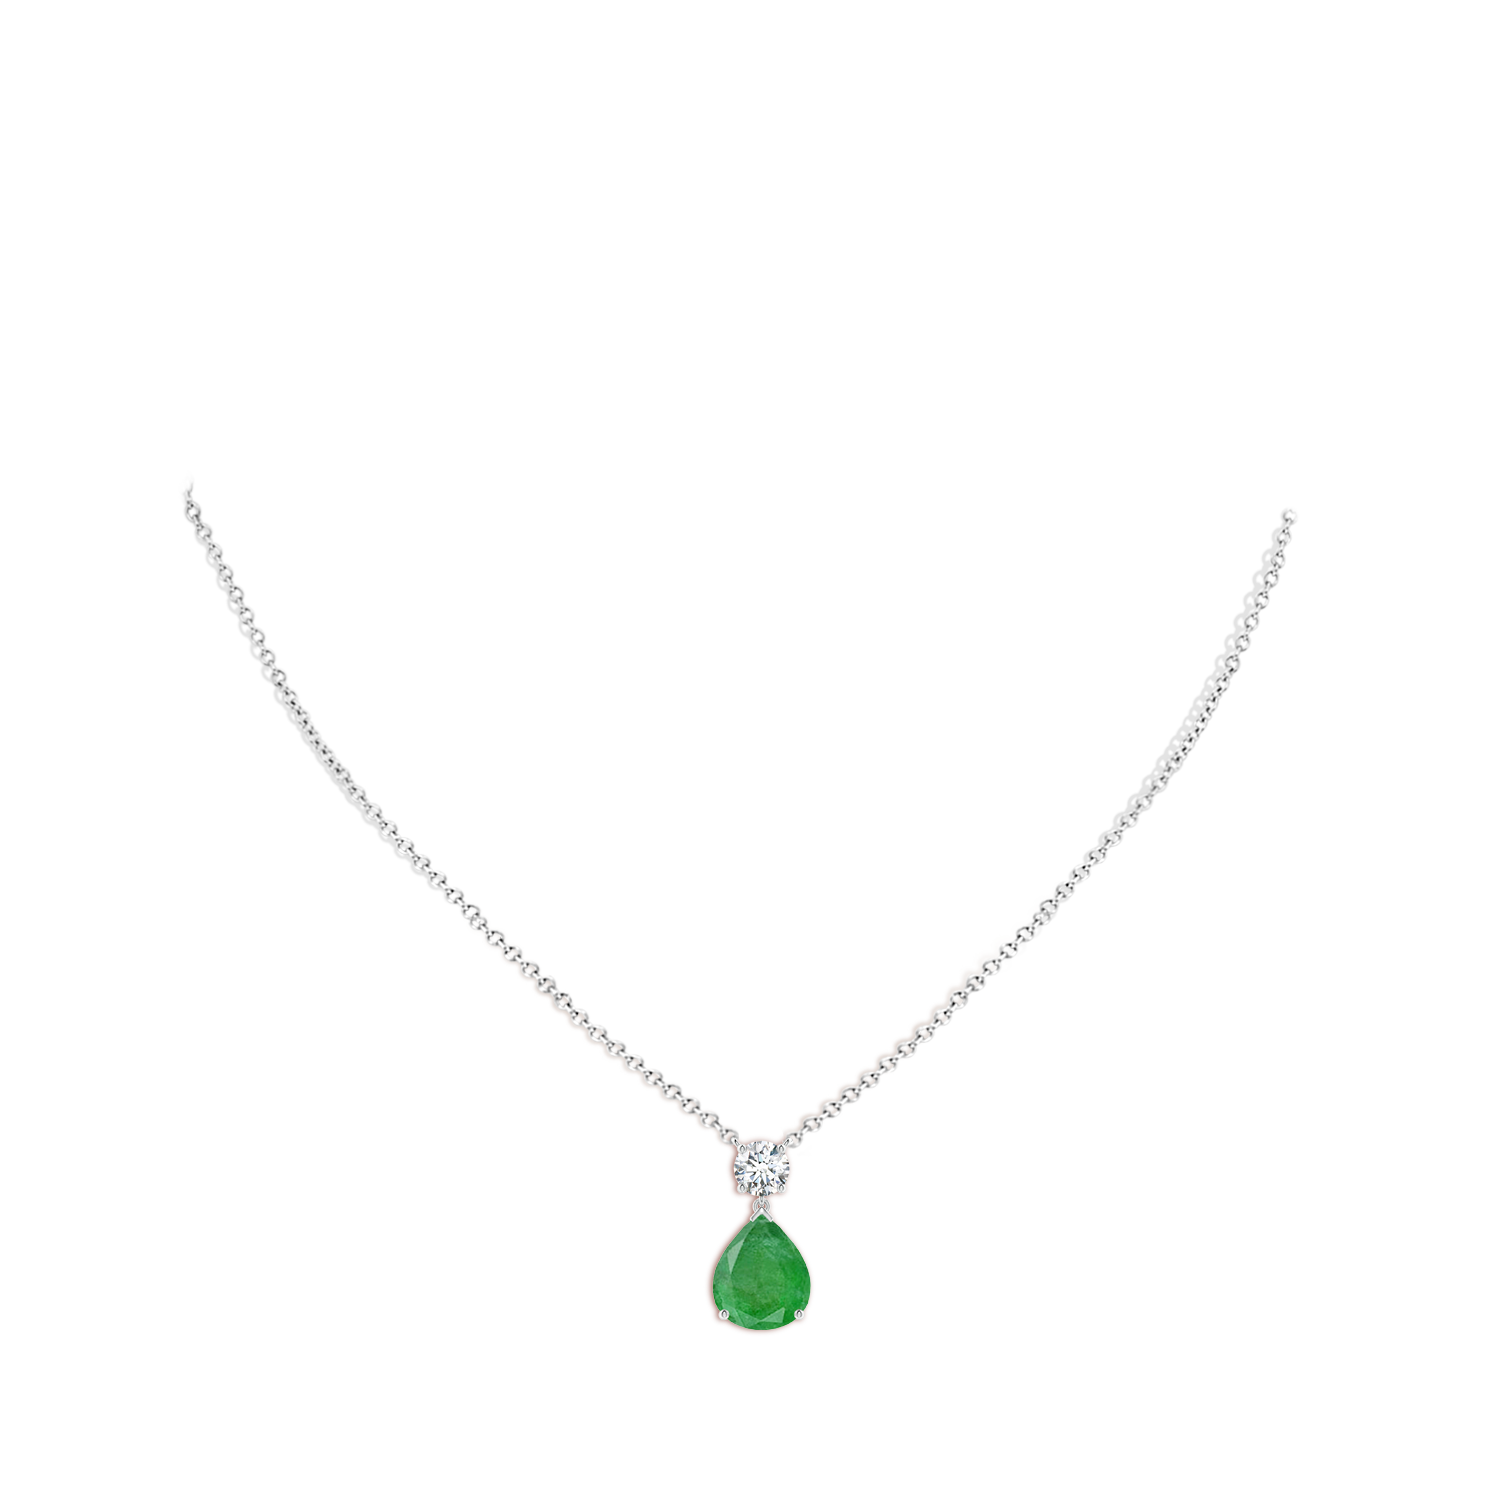 A - Emerald / 5.21 CT / 14 KT White Gold